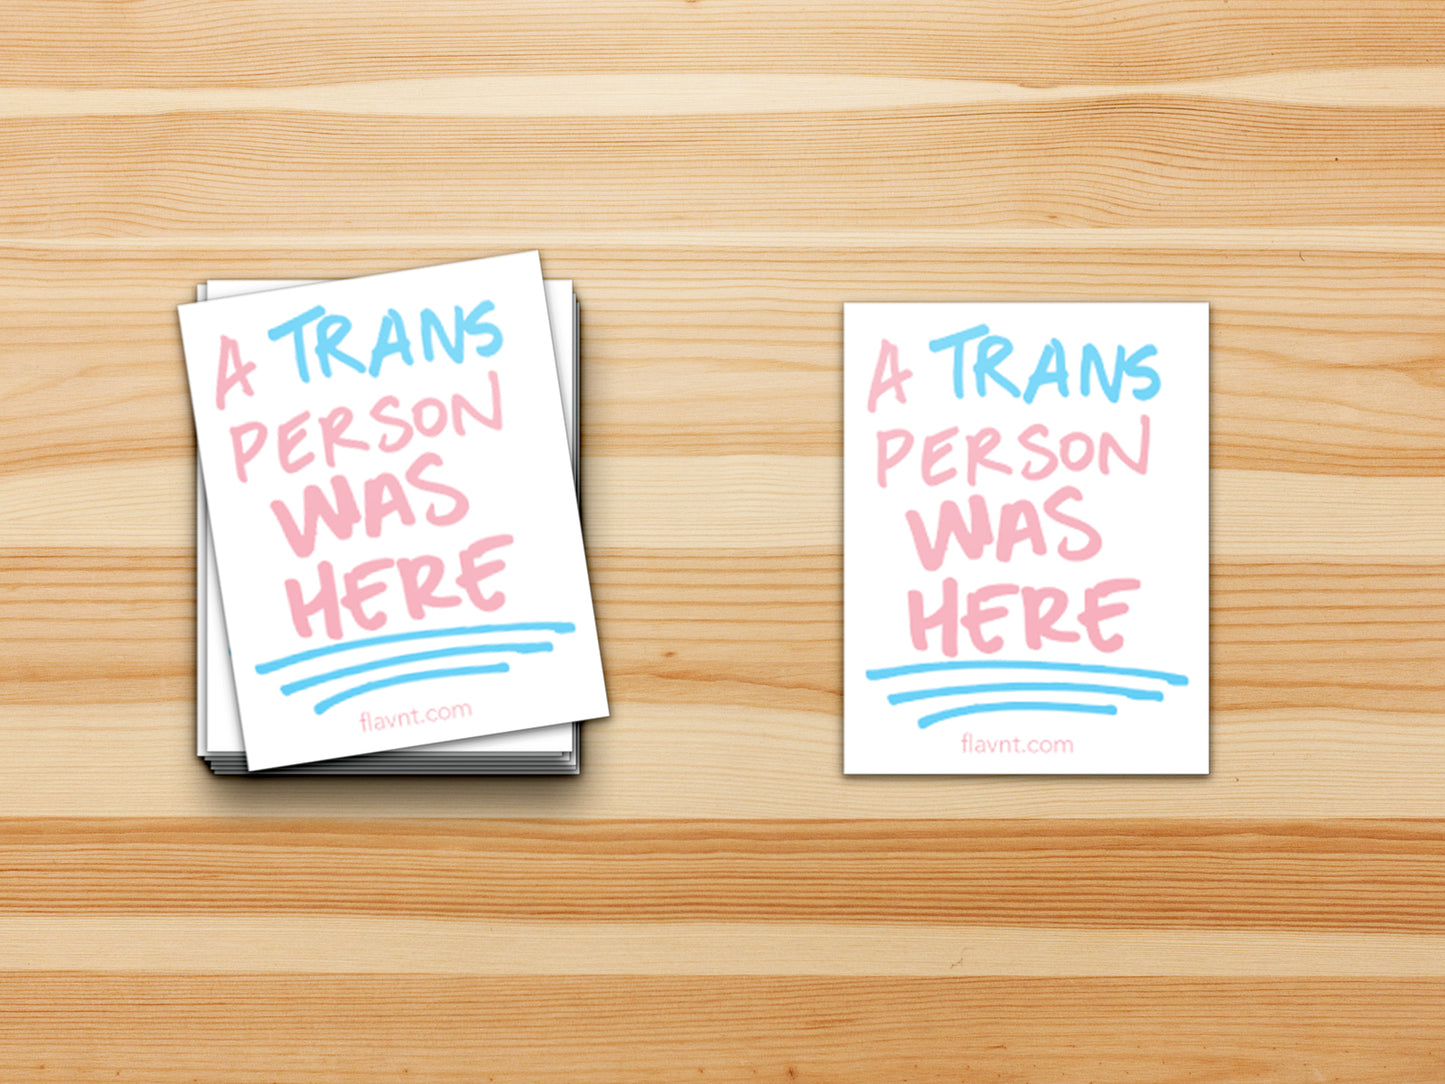 A Trans Person was Here Sticker